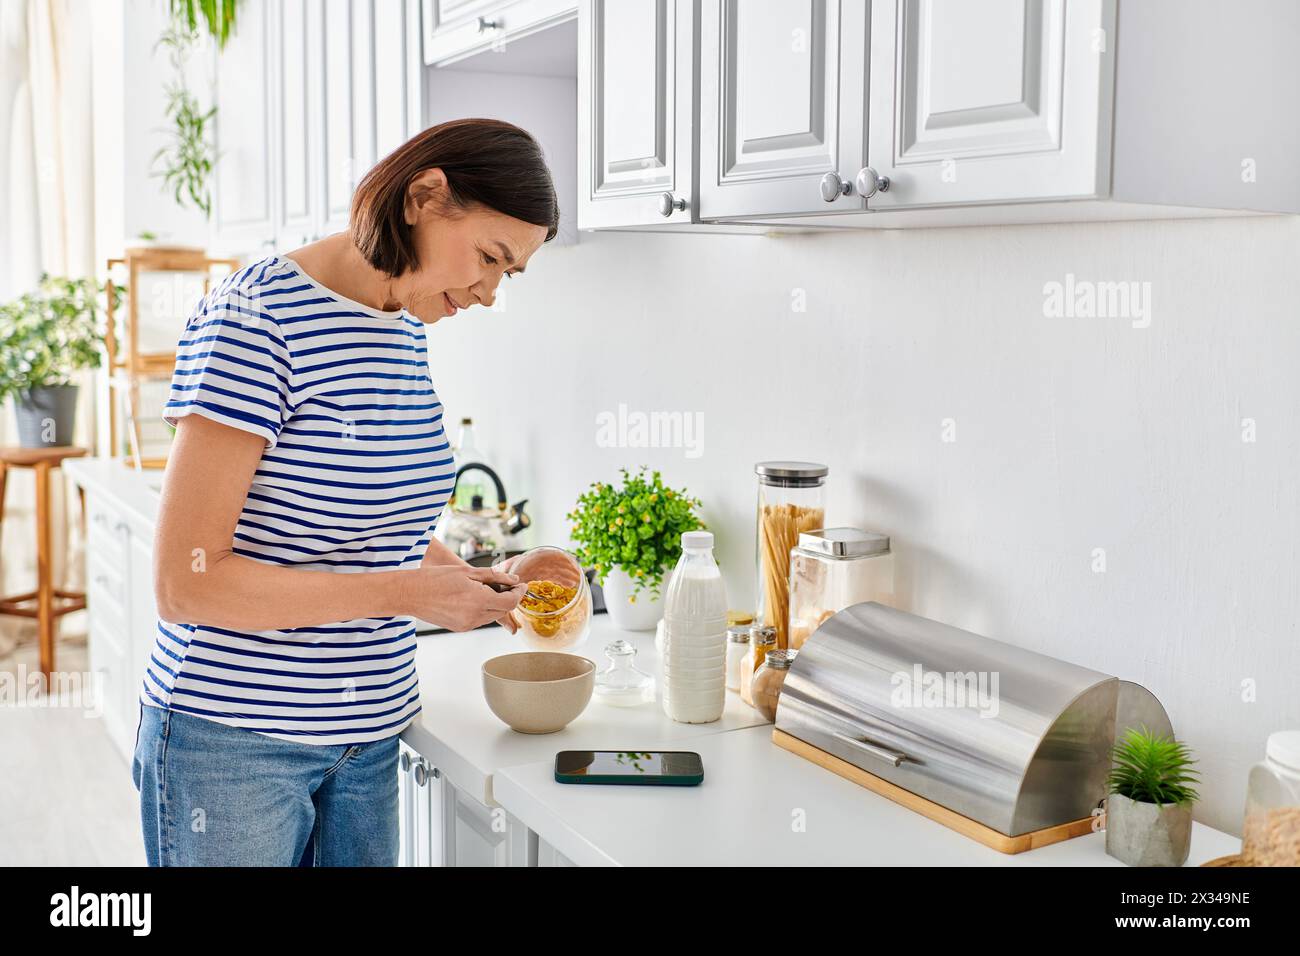 A woman in cozy homewear preparing food in a kitchen. Stock Photo